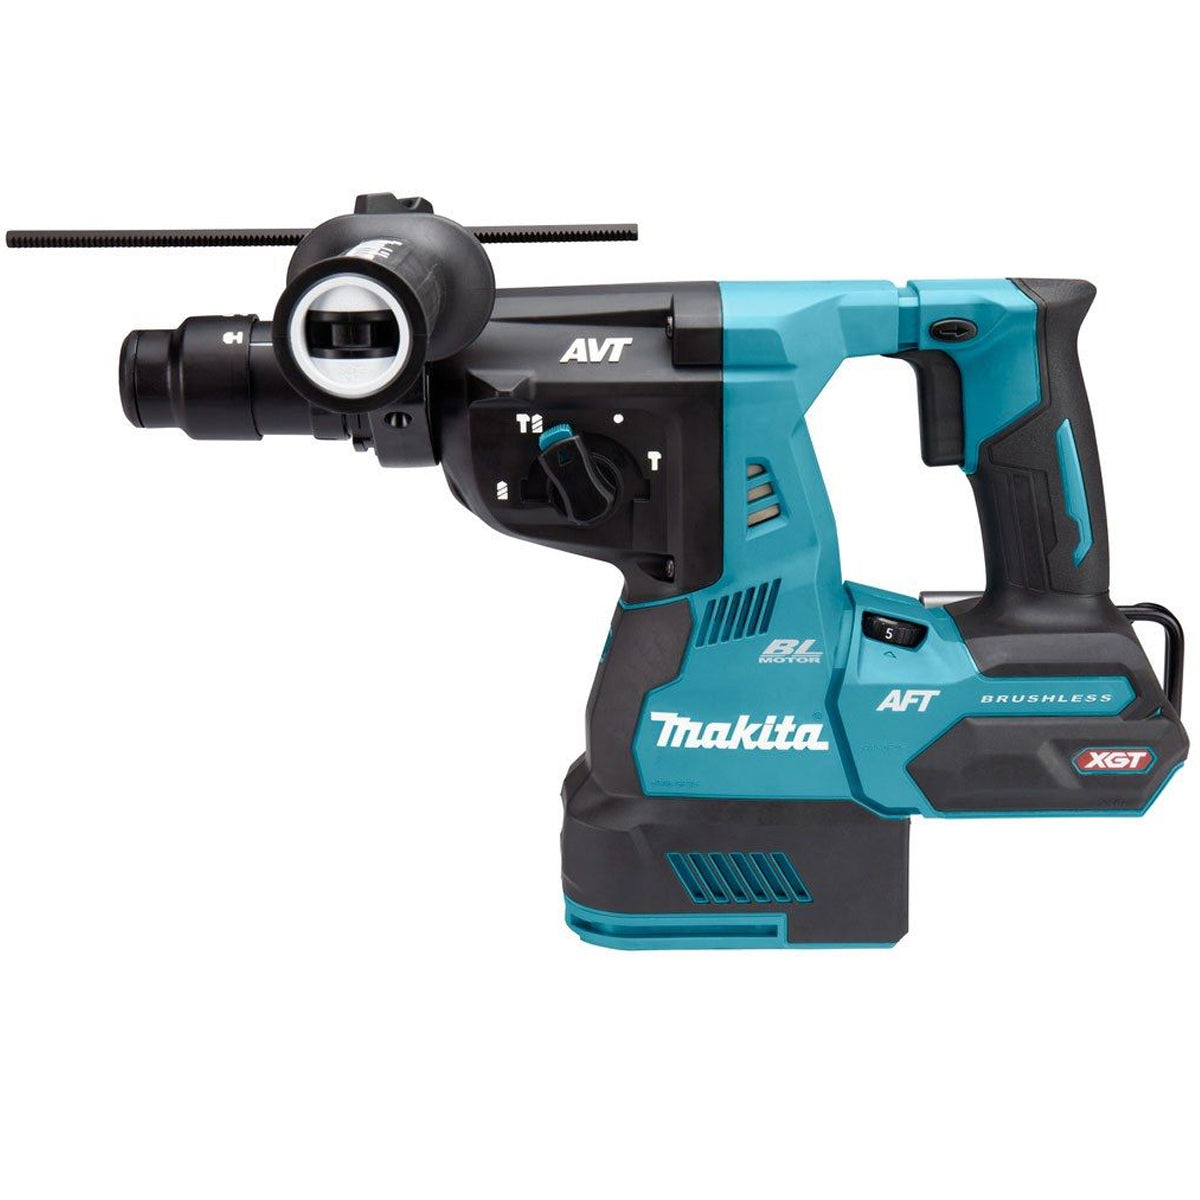 Makita HR003GZ 40V Brushless SDS+ Rotary Hammer Drill With 1 x 2.5Ah Battery & Charger